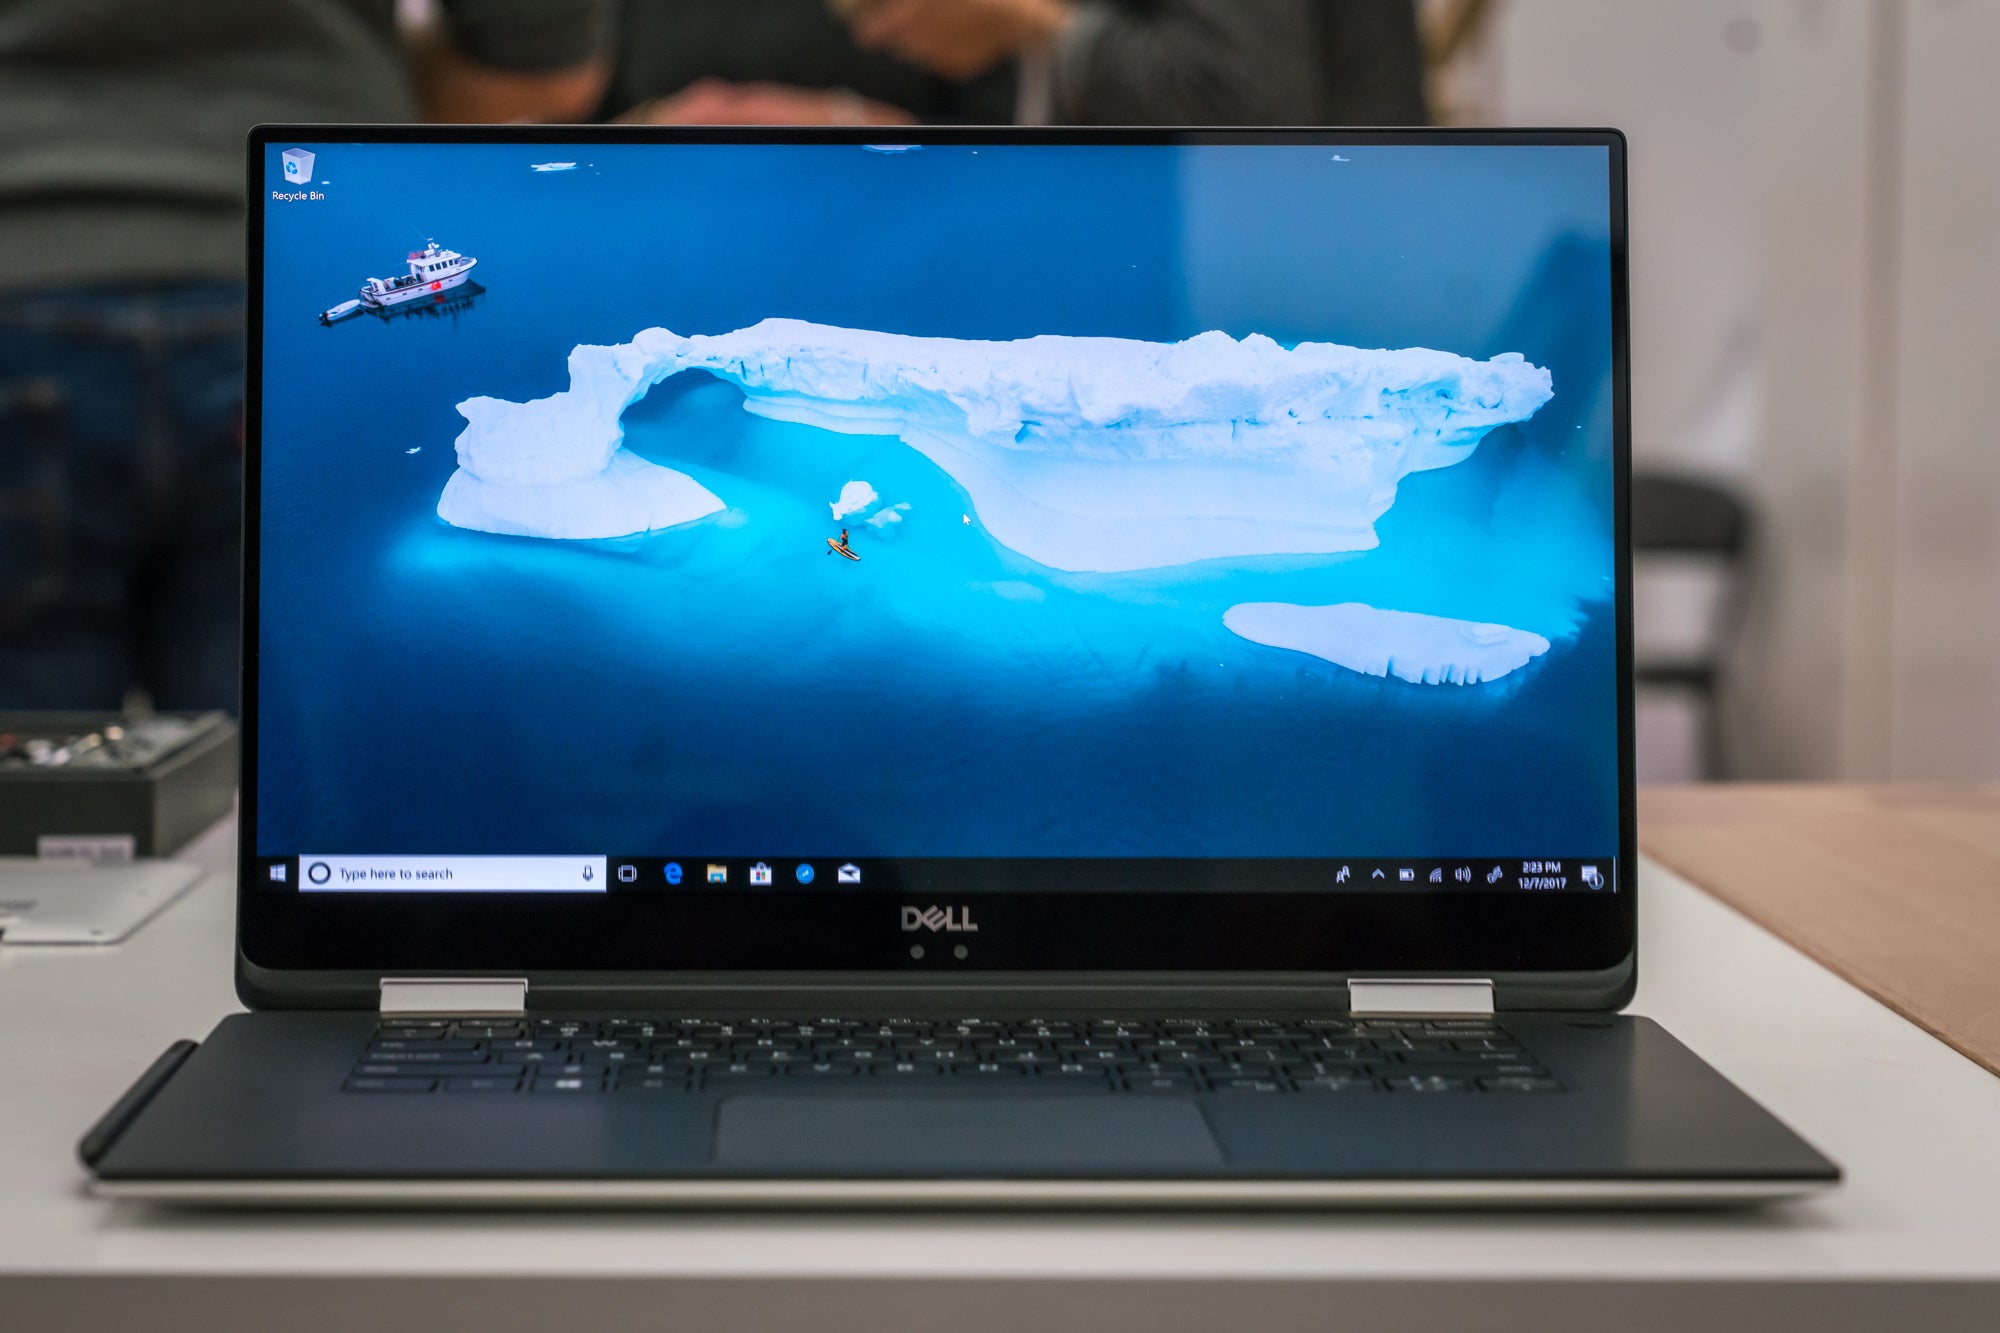 Dell XPS 15 2-in-1 specs, features, price, and release date | PCWorld